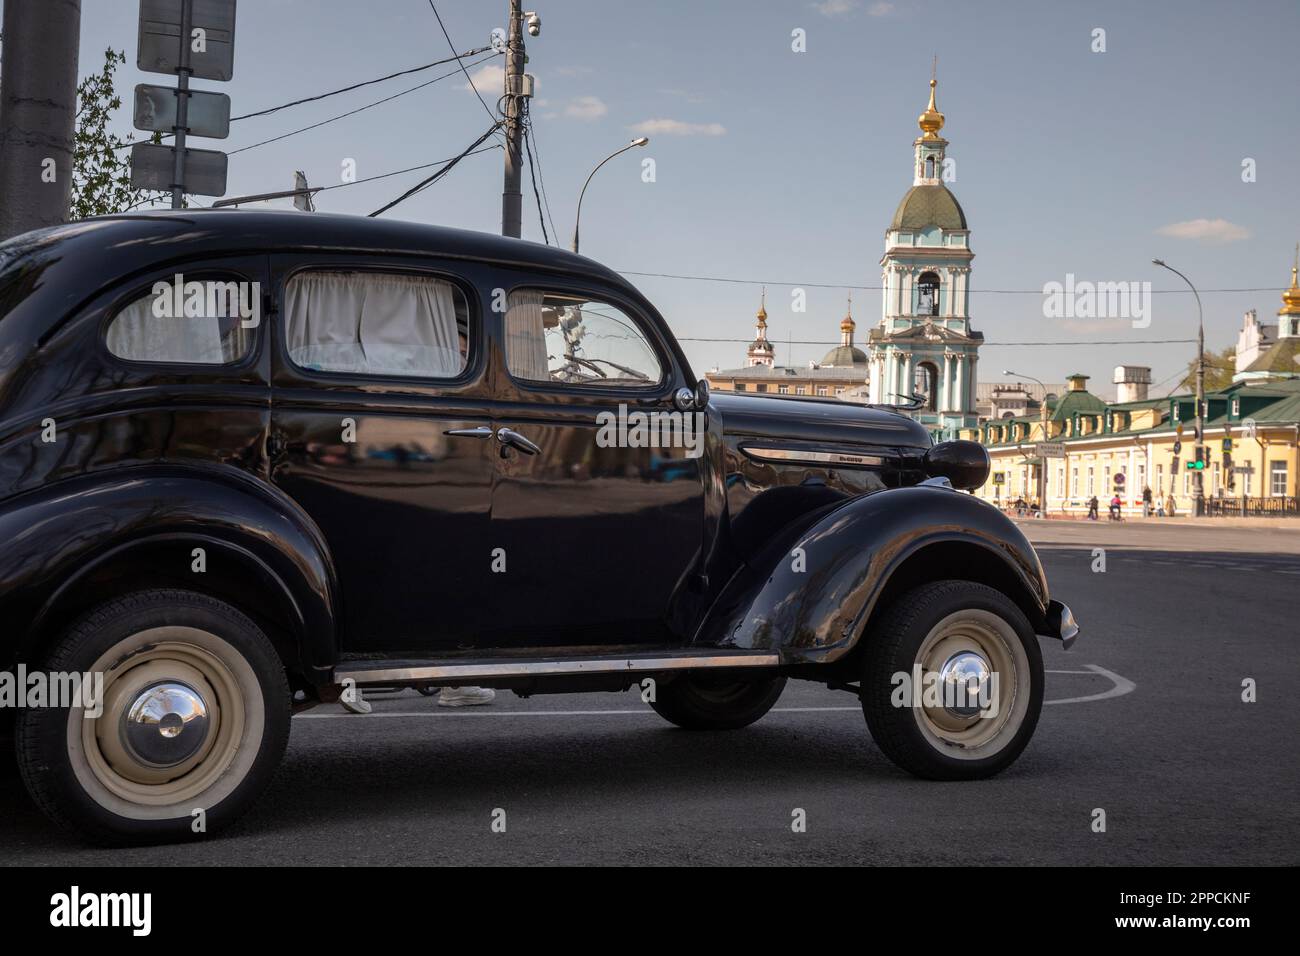 Moscow, Russia. 23rd of April, 2023. A vintage 1940 Chrysler De Soto car stands at the entrance of a high-rise building on Kotelnicheskaya Embankment on Yauzskaya Street in the center of Moscow, Russia Stock Photo